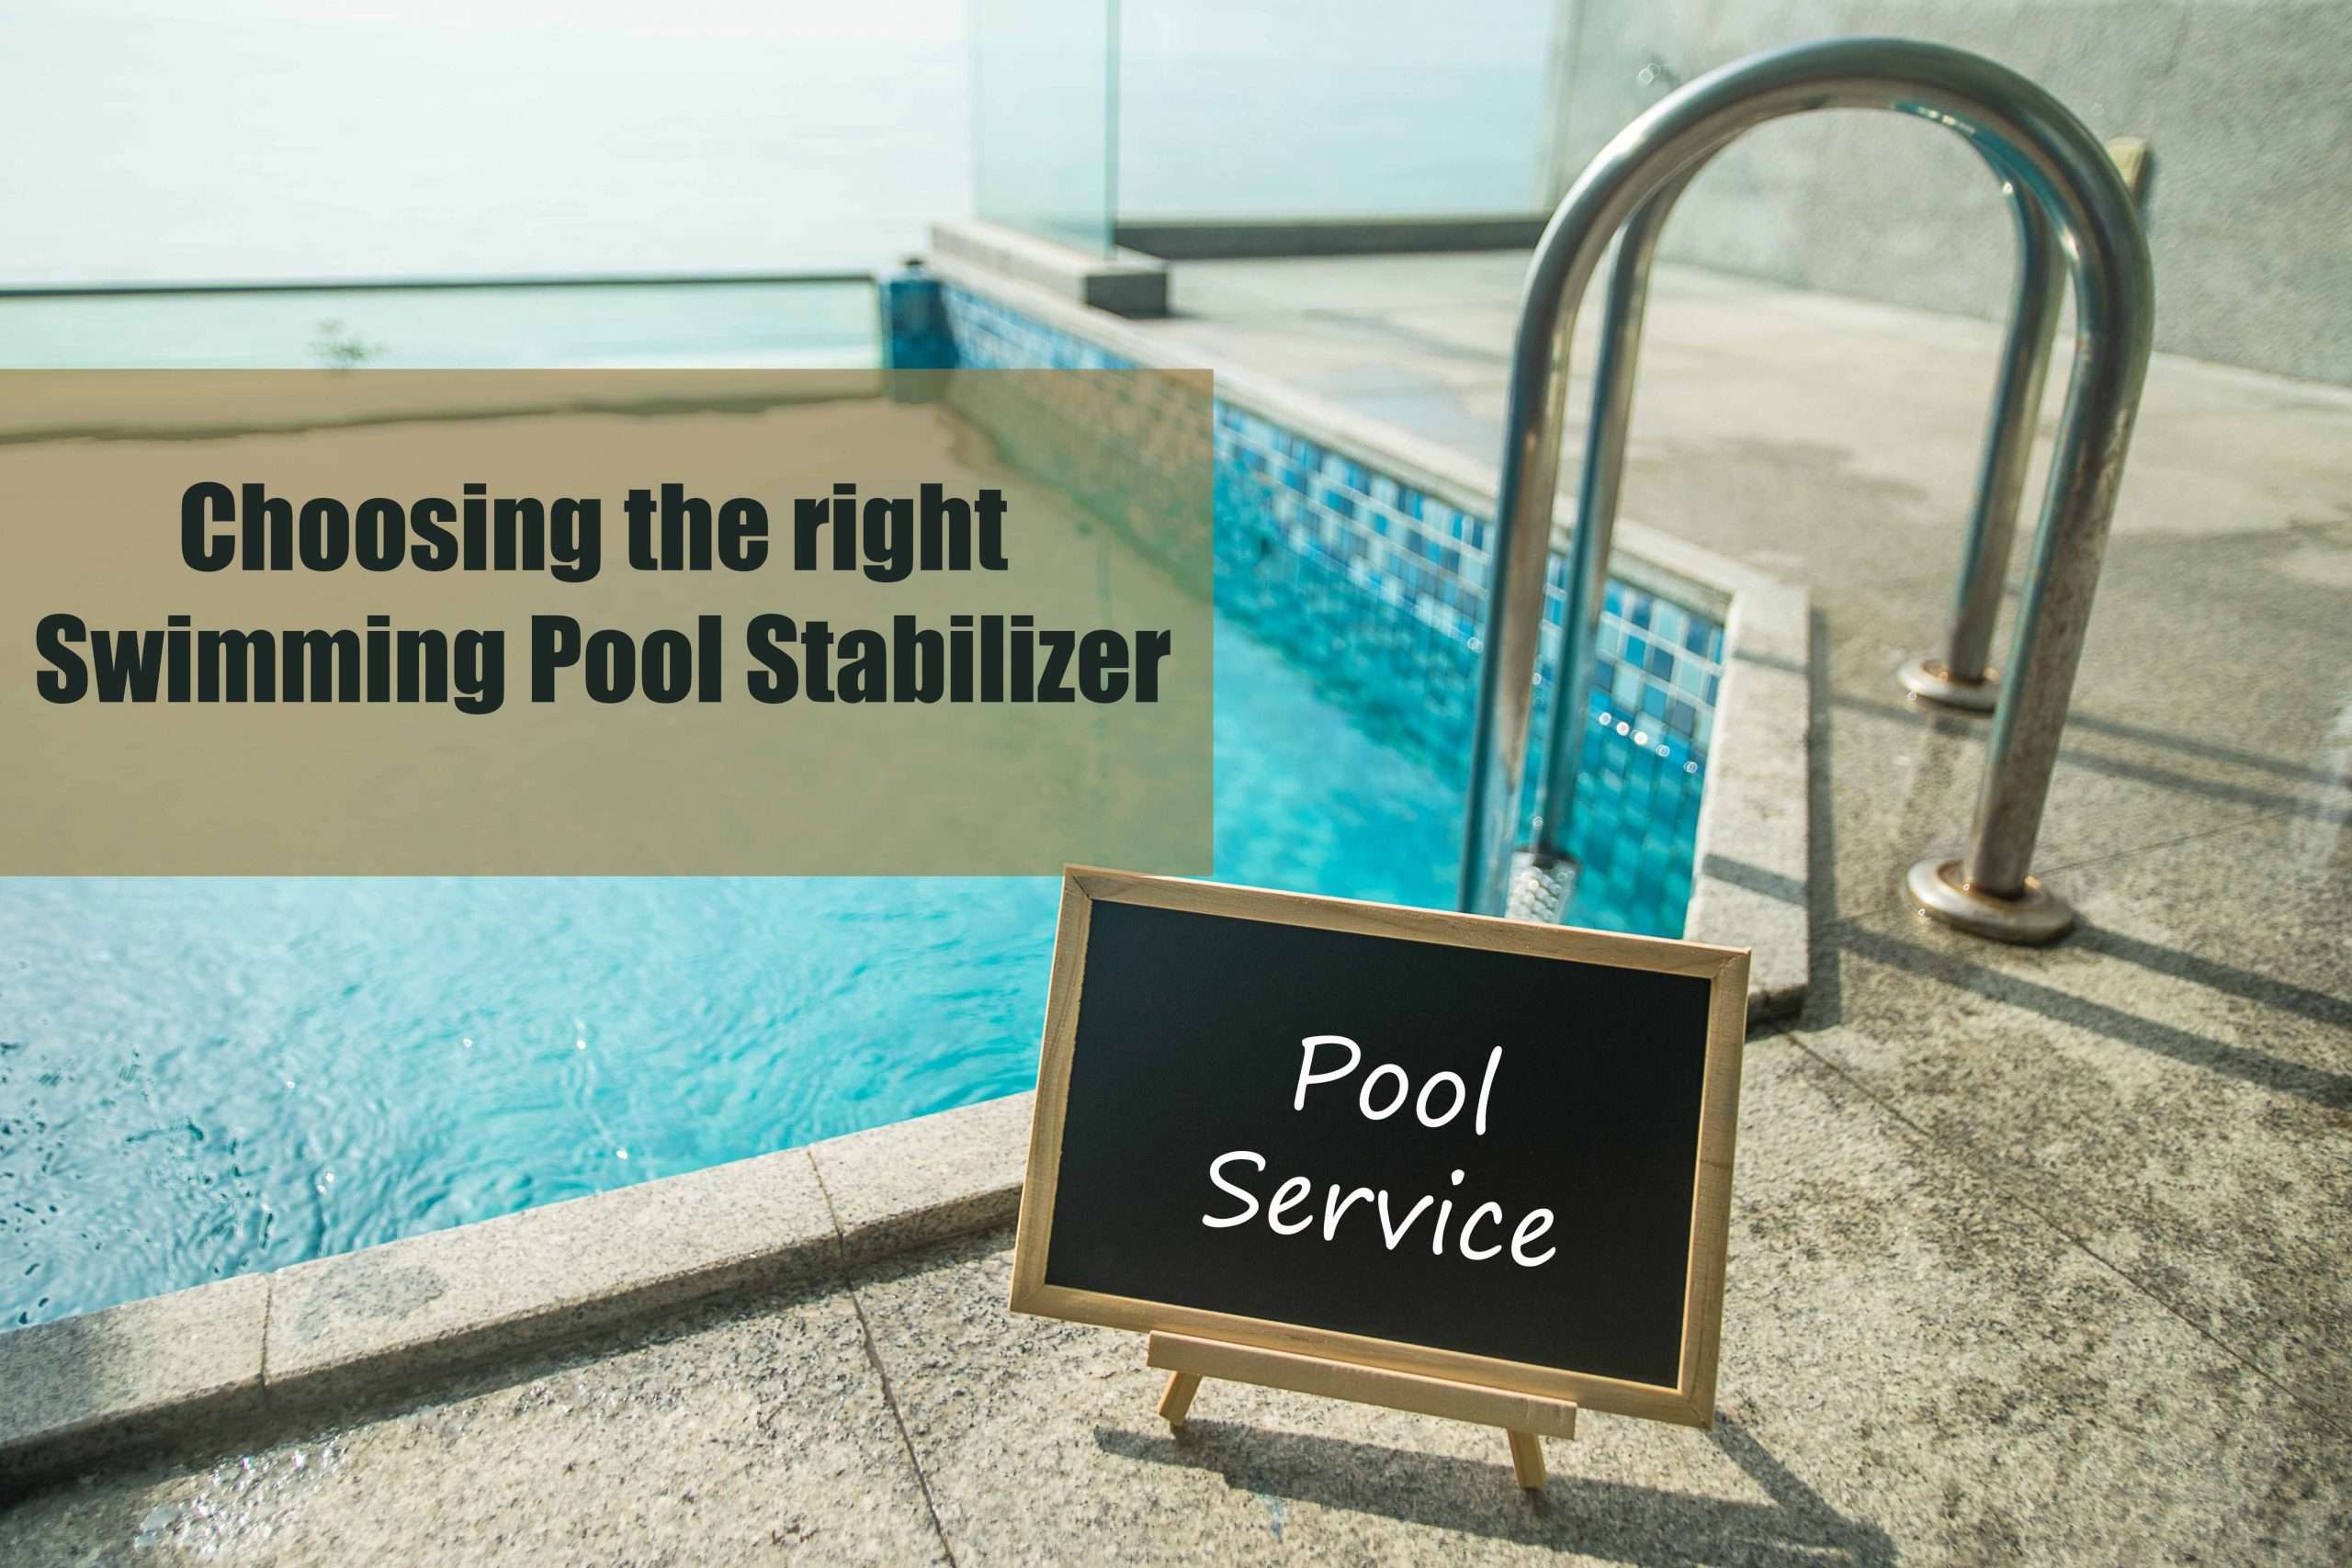 Choosing the right Swimming Pool Stabilizer